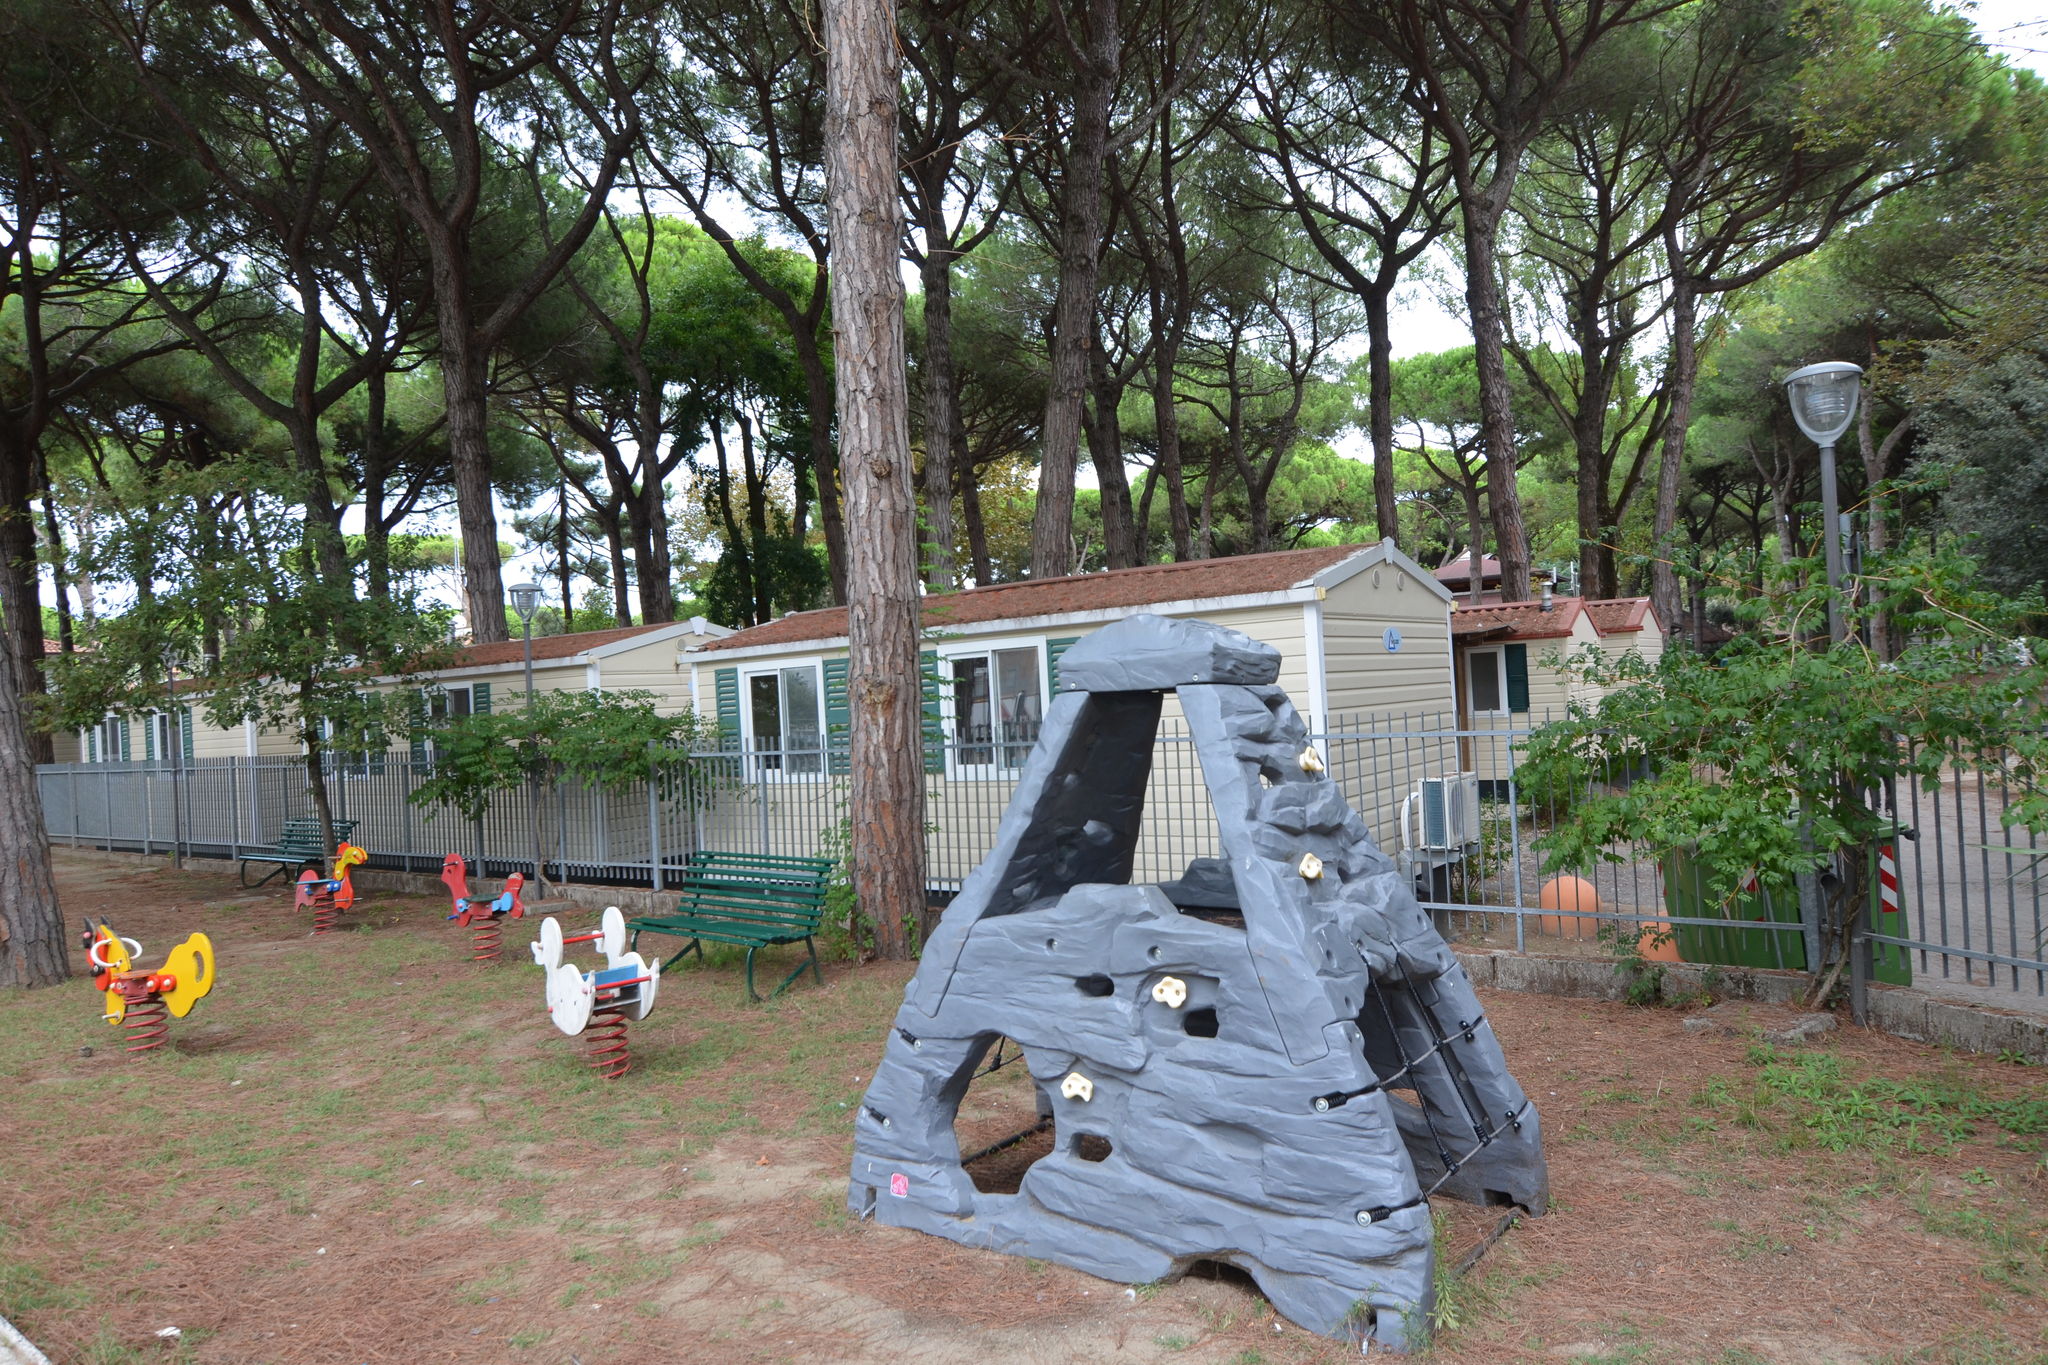 Pretty Mobile Home in Lido di Spina with Gym, Pool, Garden